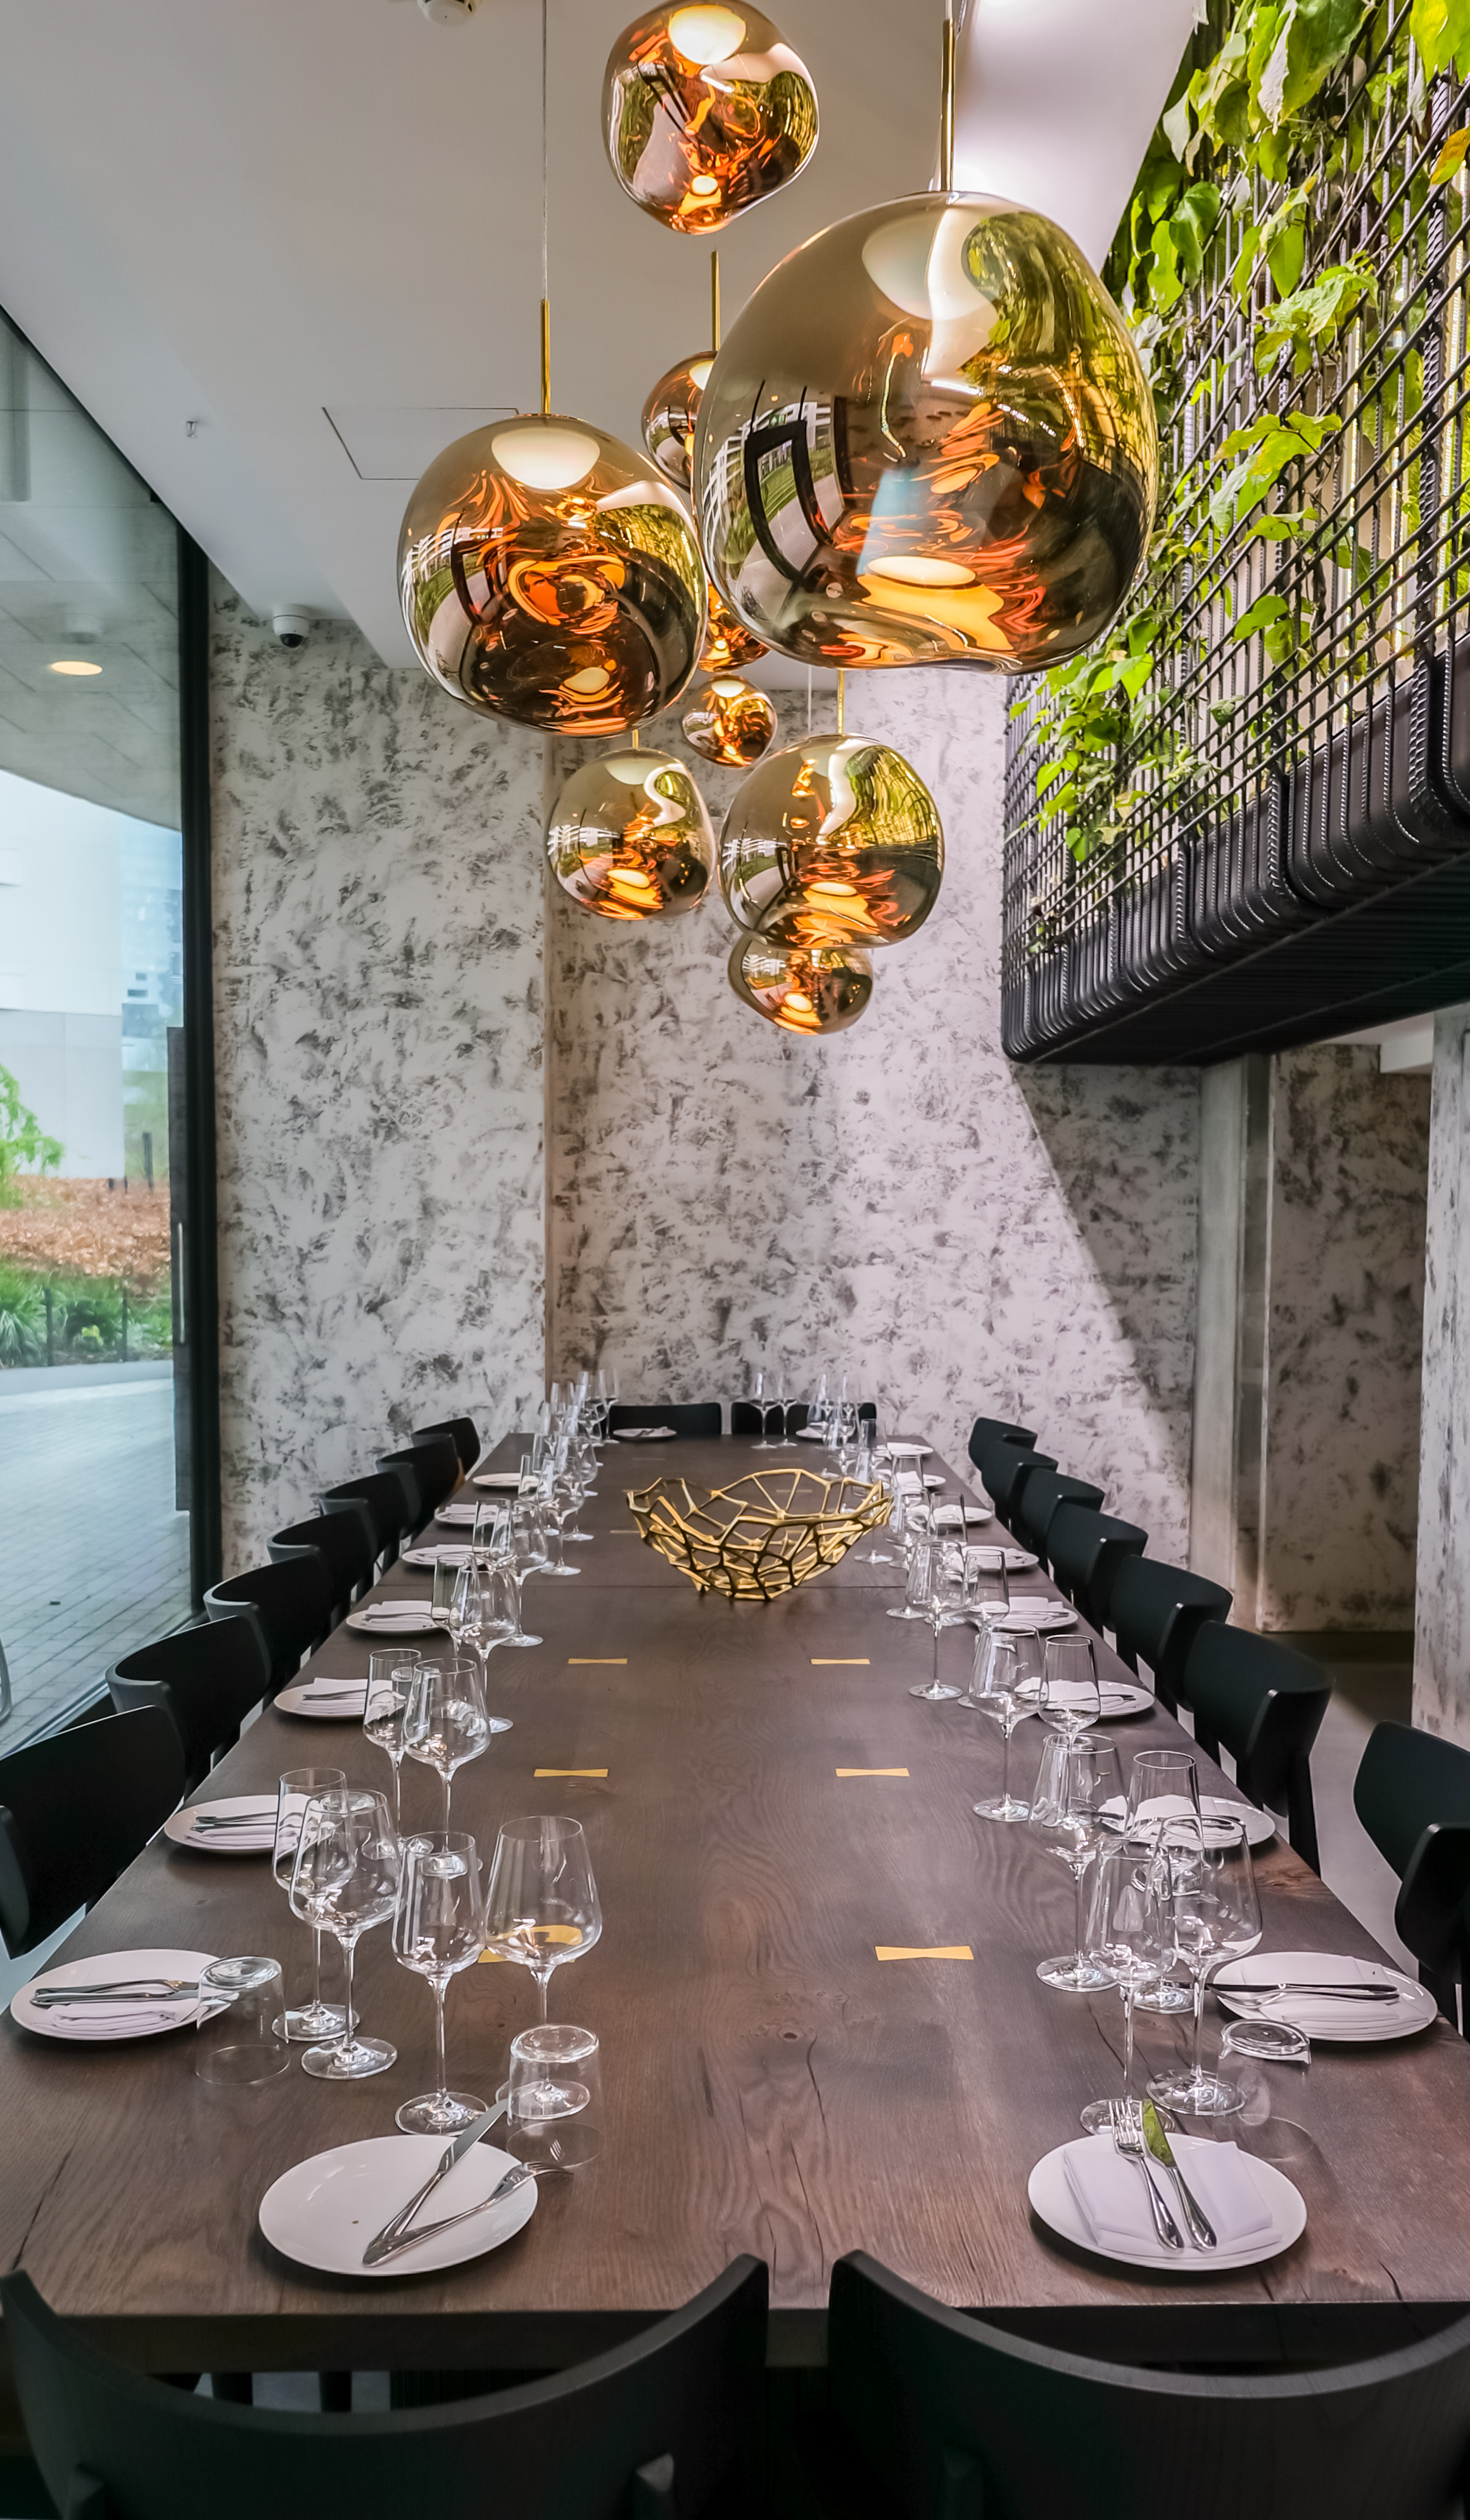 Private dining room with a gold lamp